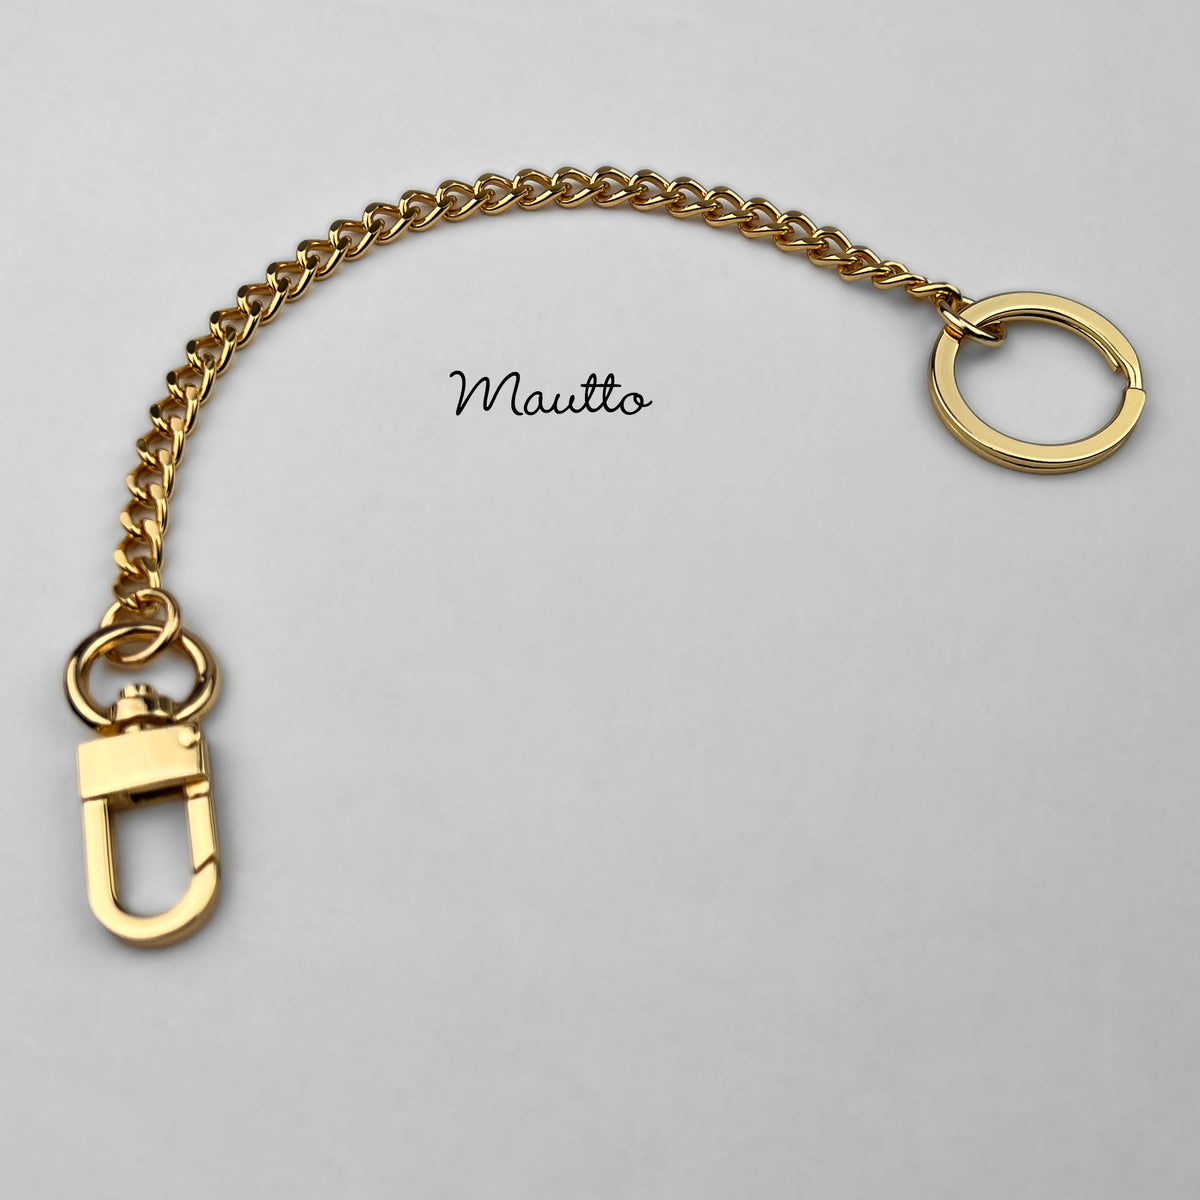 Mautto Luxury Chain Wrist Strap - Secure Wallets, SLGs, Clutches to Arm Petite / Gold-Tone / Standard